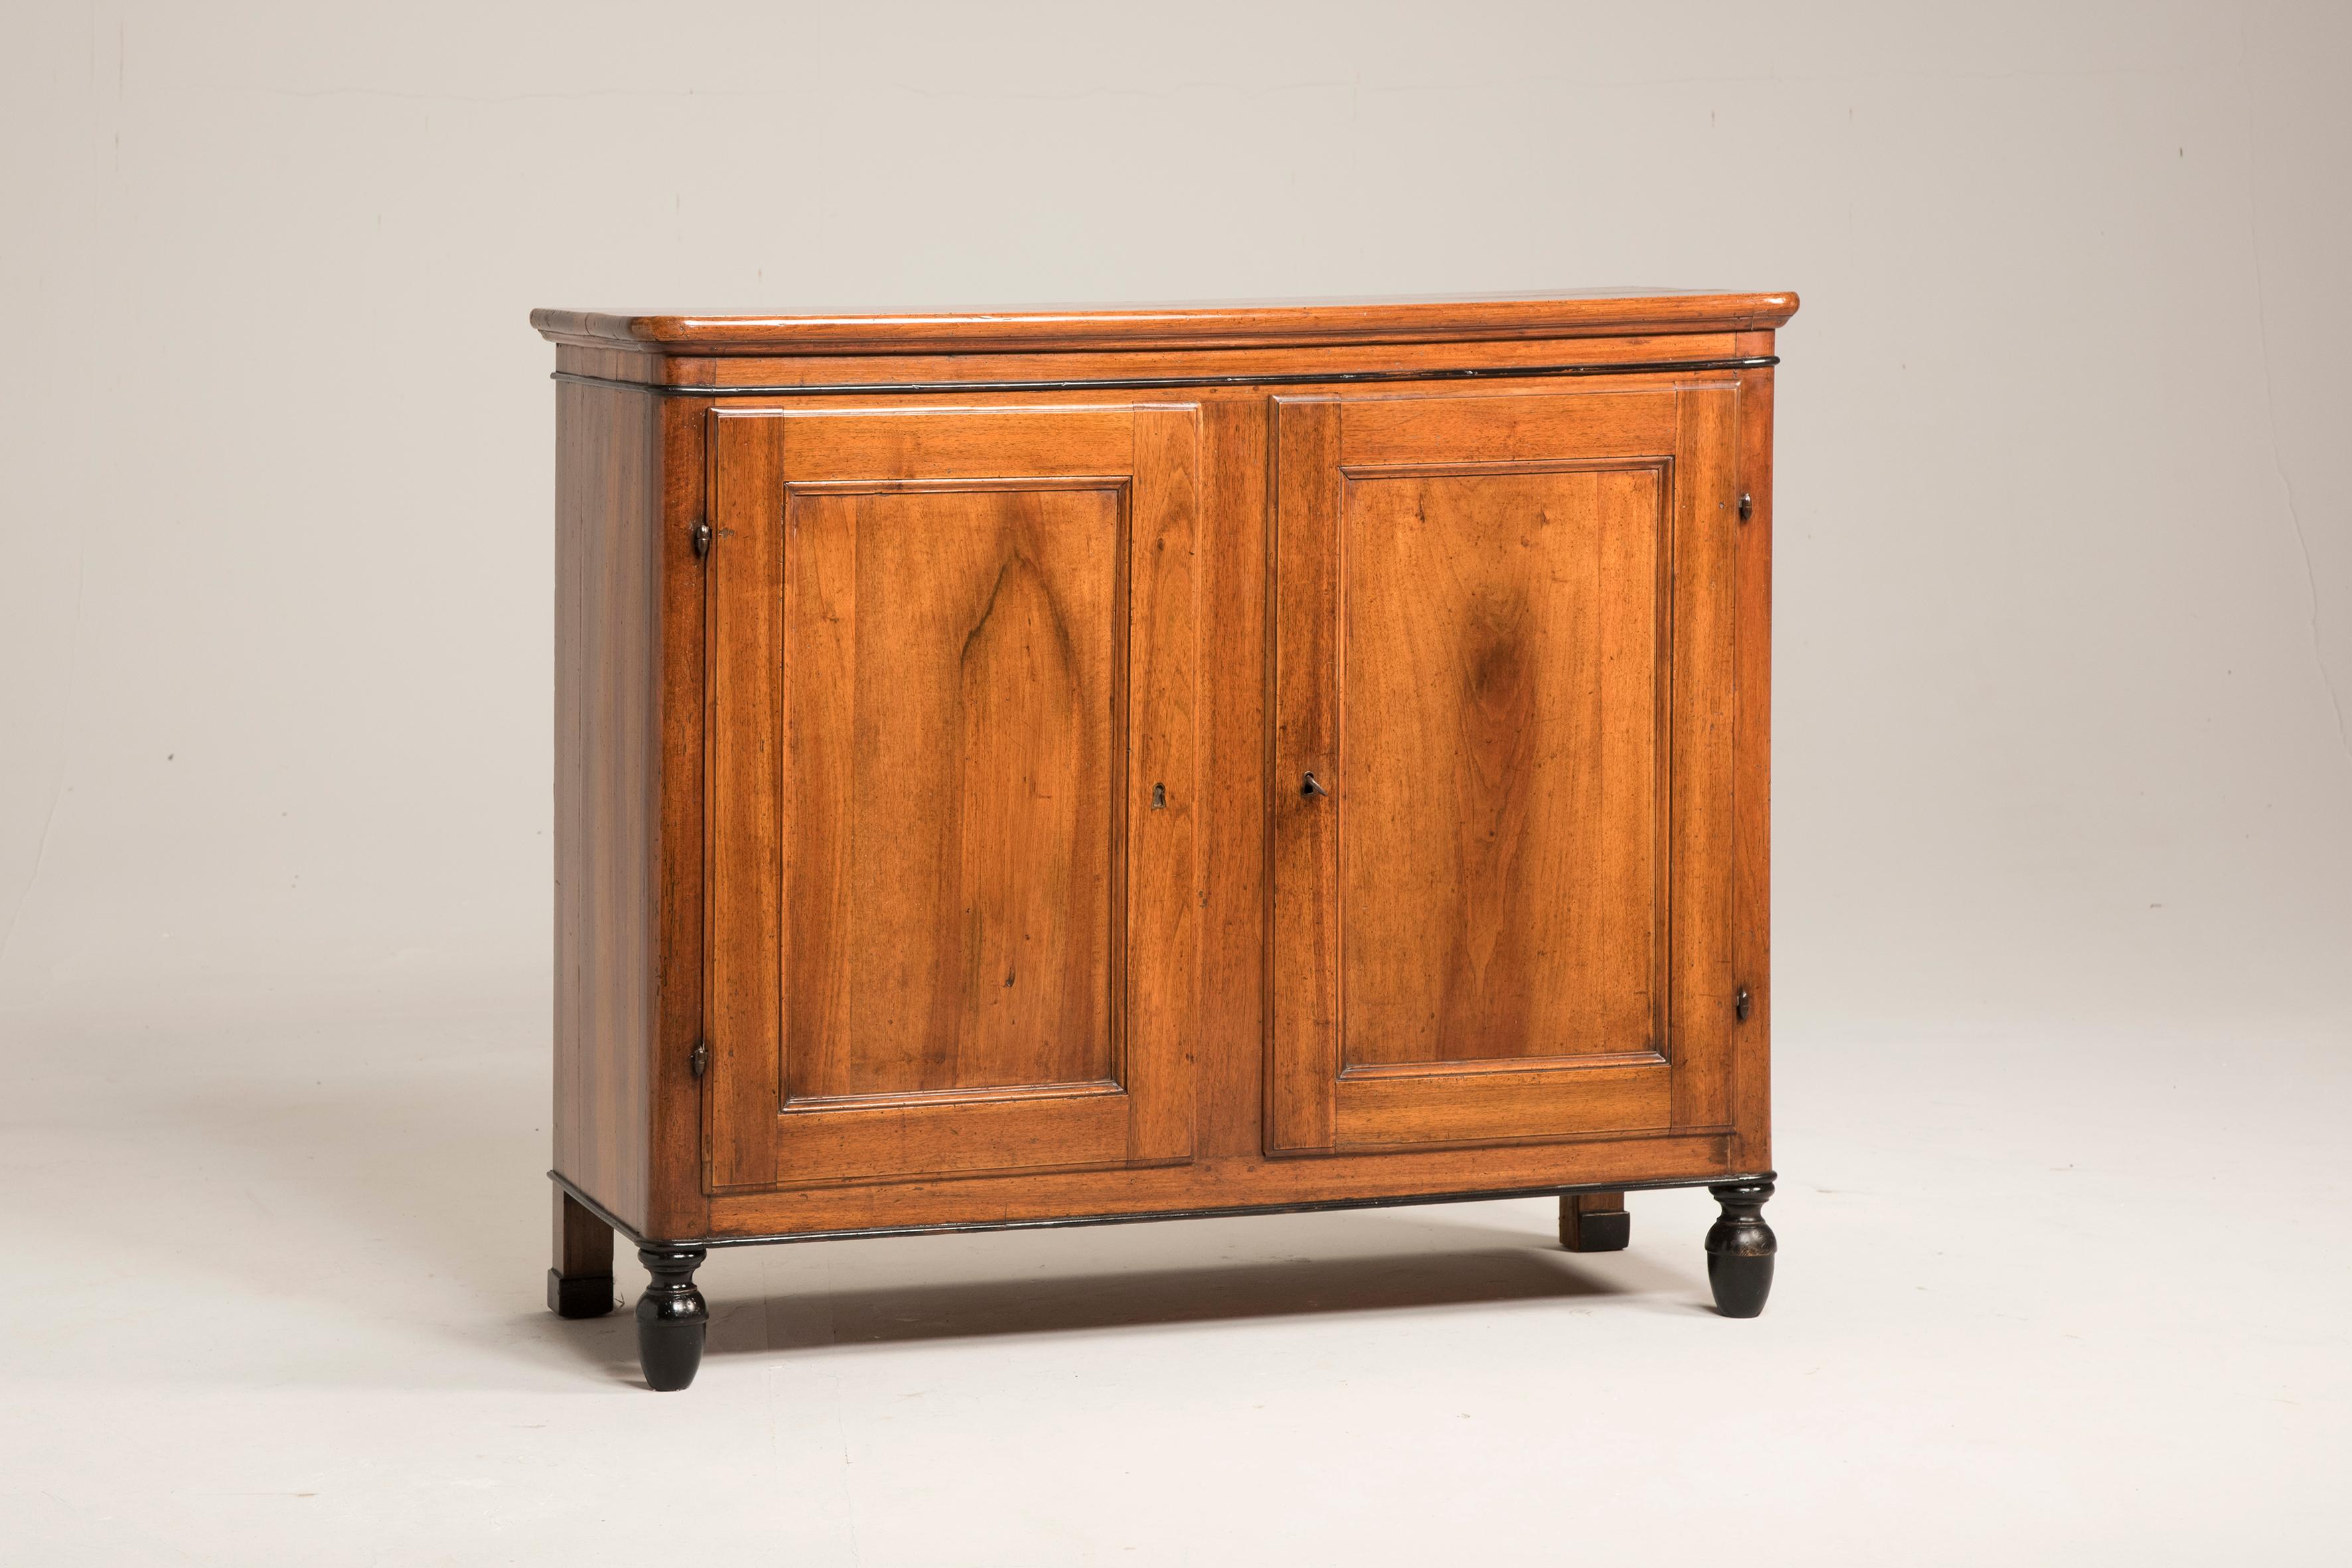 Italian 19th century Empire walnut wood two-door credenza. Rounded edges and black legs. From Veneto, a north region of Italy from early 19th century. The sideboard features two doors and one big storage space with one adjustable shelf. We have